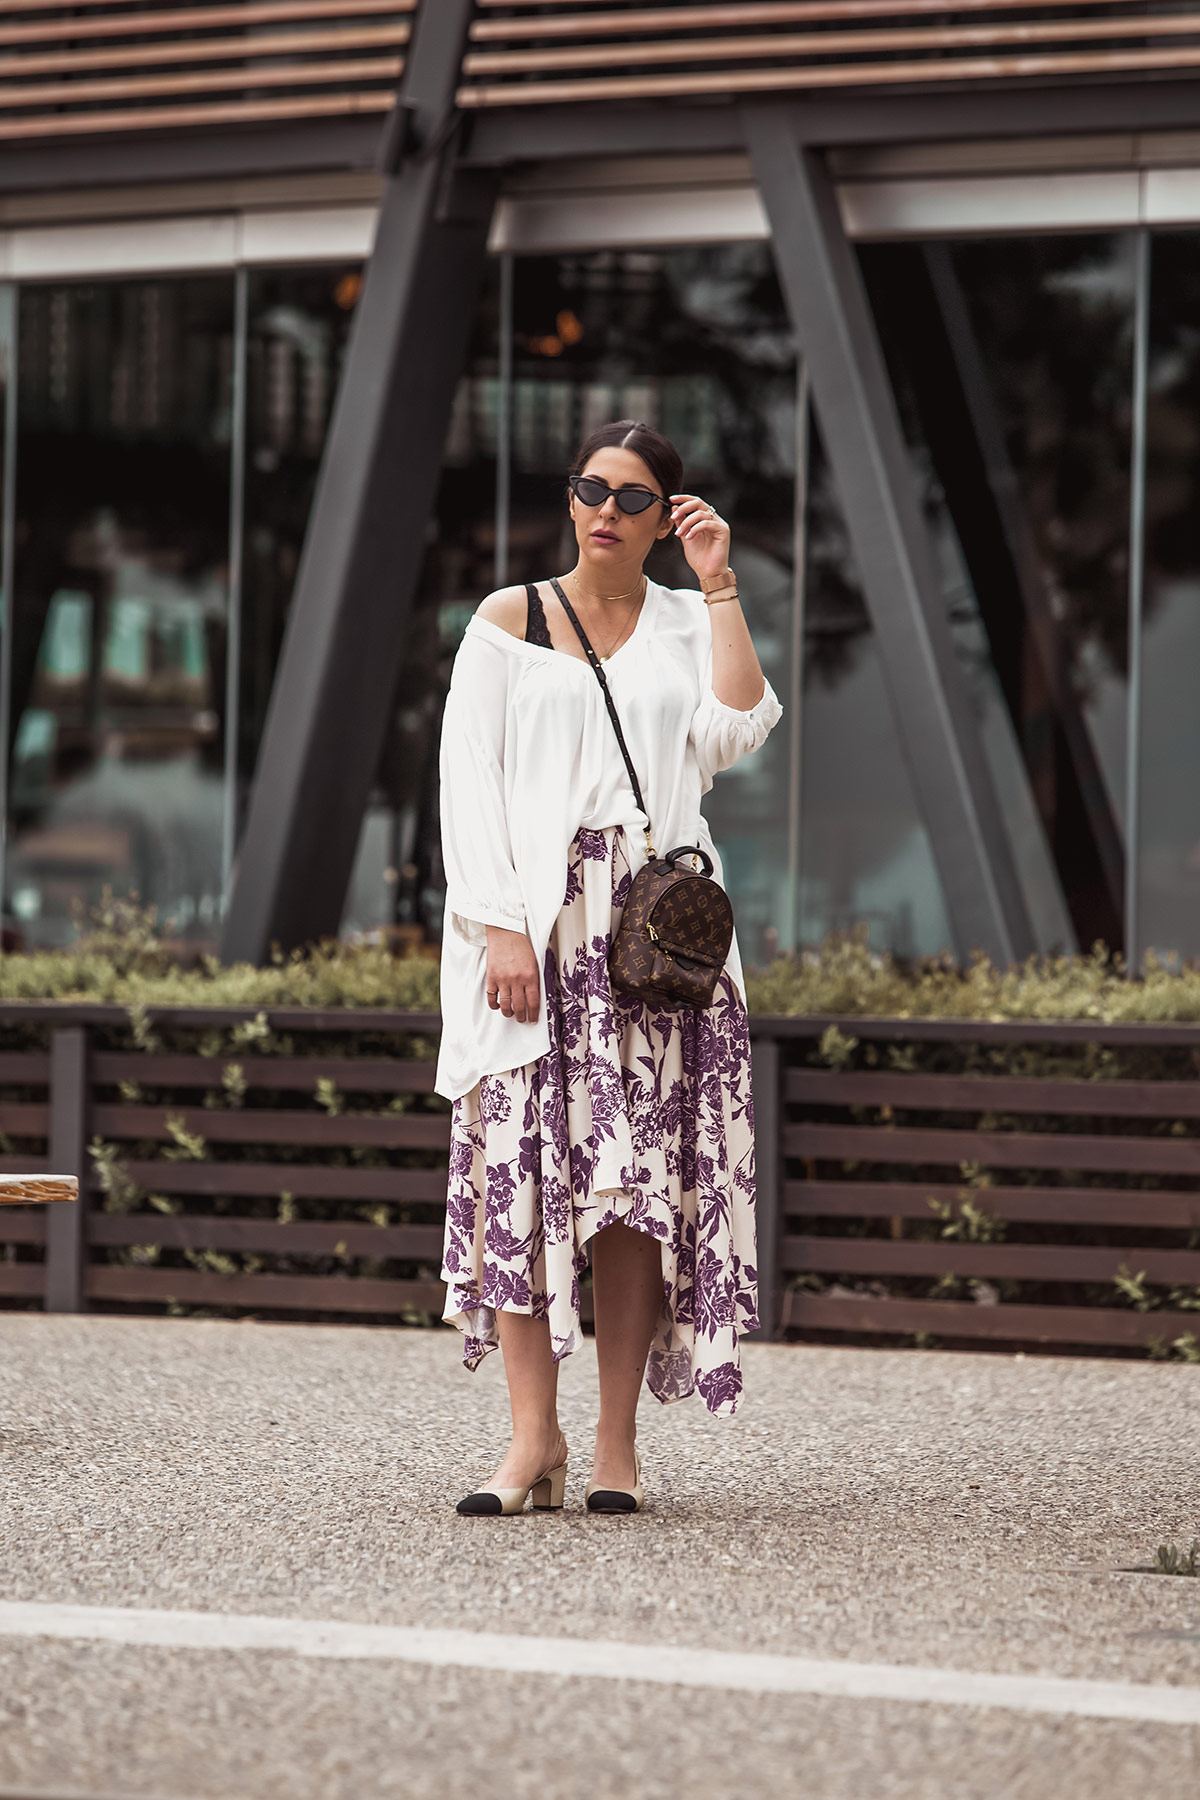 5 Tips To Rock The Oversized Look by Stella Asteria - Wearing oversized short, asymmetrical skirt, Louis Vuitton Palm Springs backpack, Chanel slingbacks and cat-eye sunglasses - Spring Style Inspiration